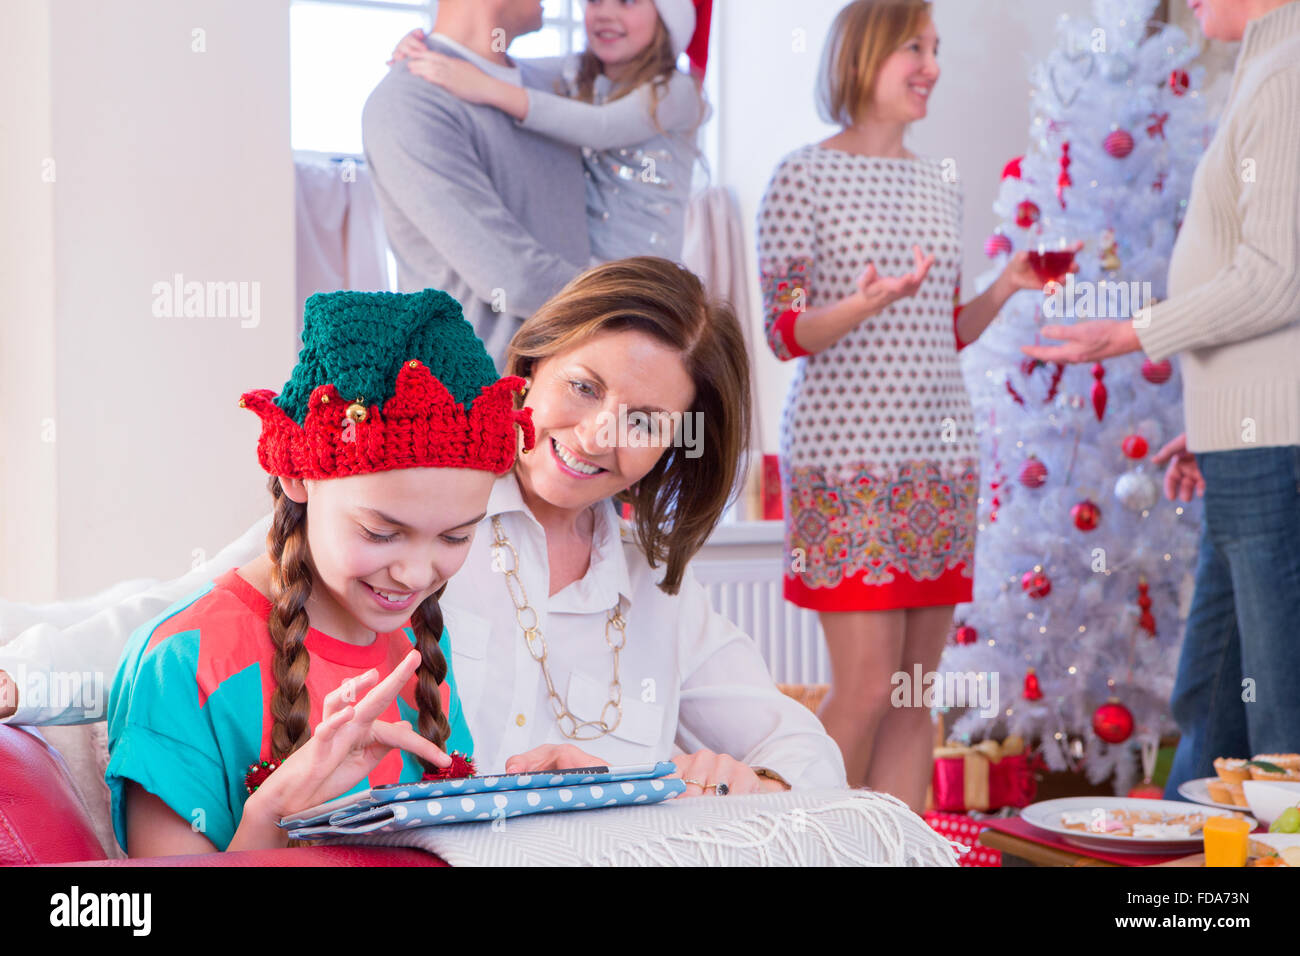 Three Generation Family at Christmas Time. A young girl and her grandma focus on the tablet while the rest of the family sociali Stock Photo